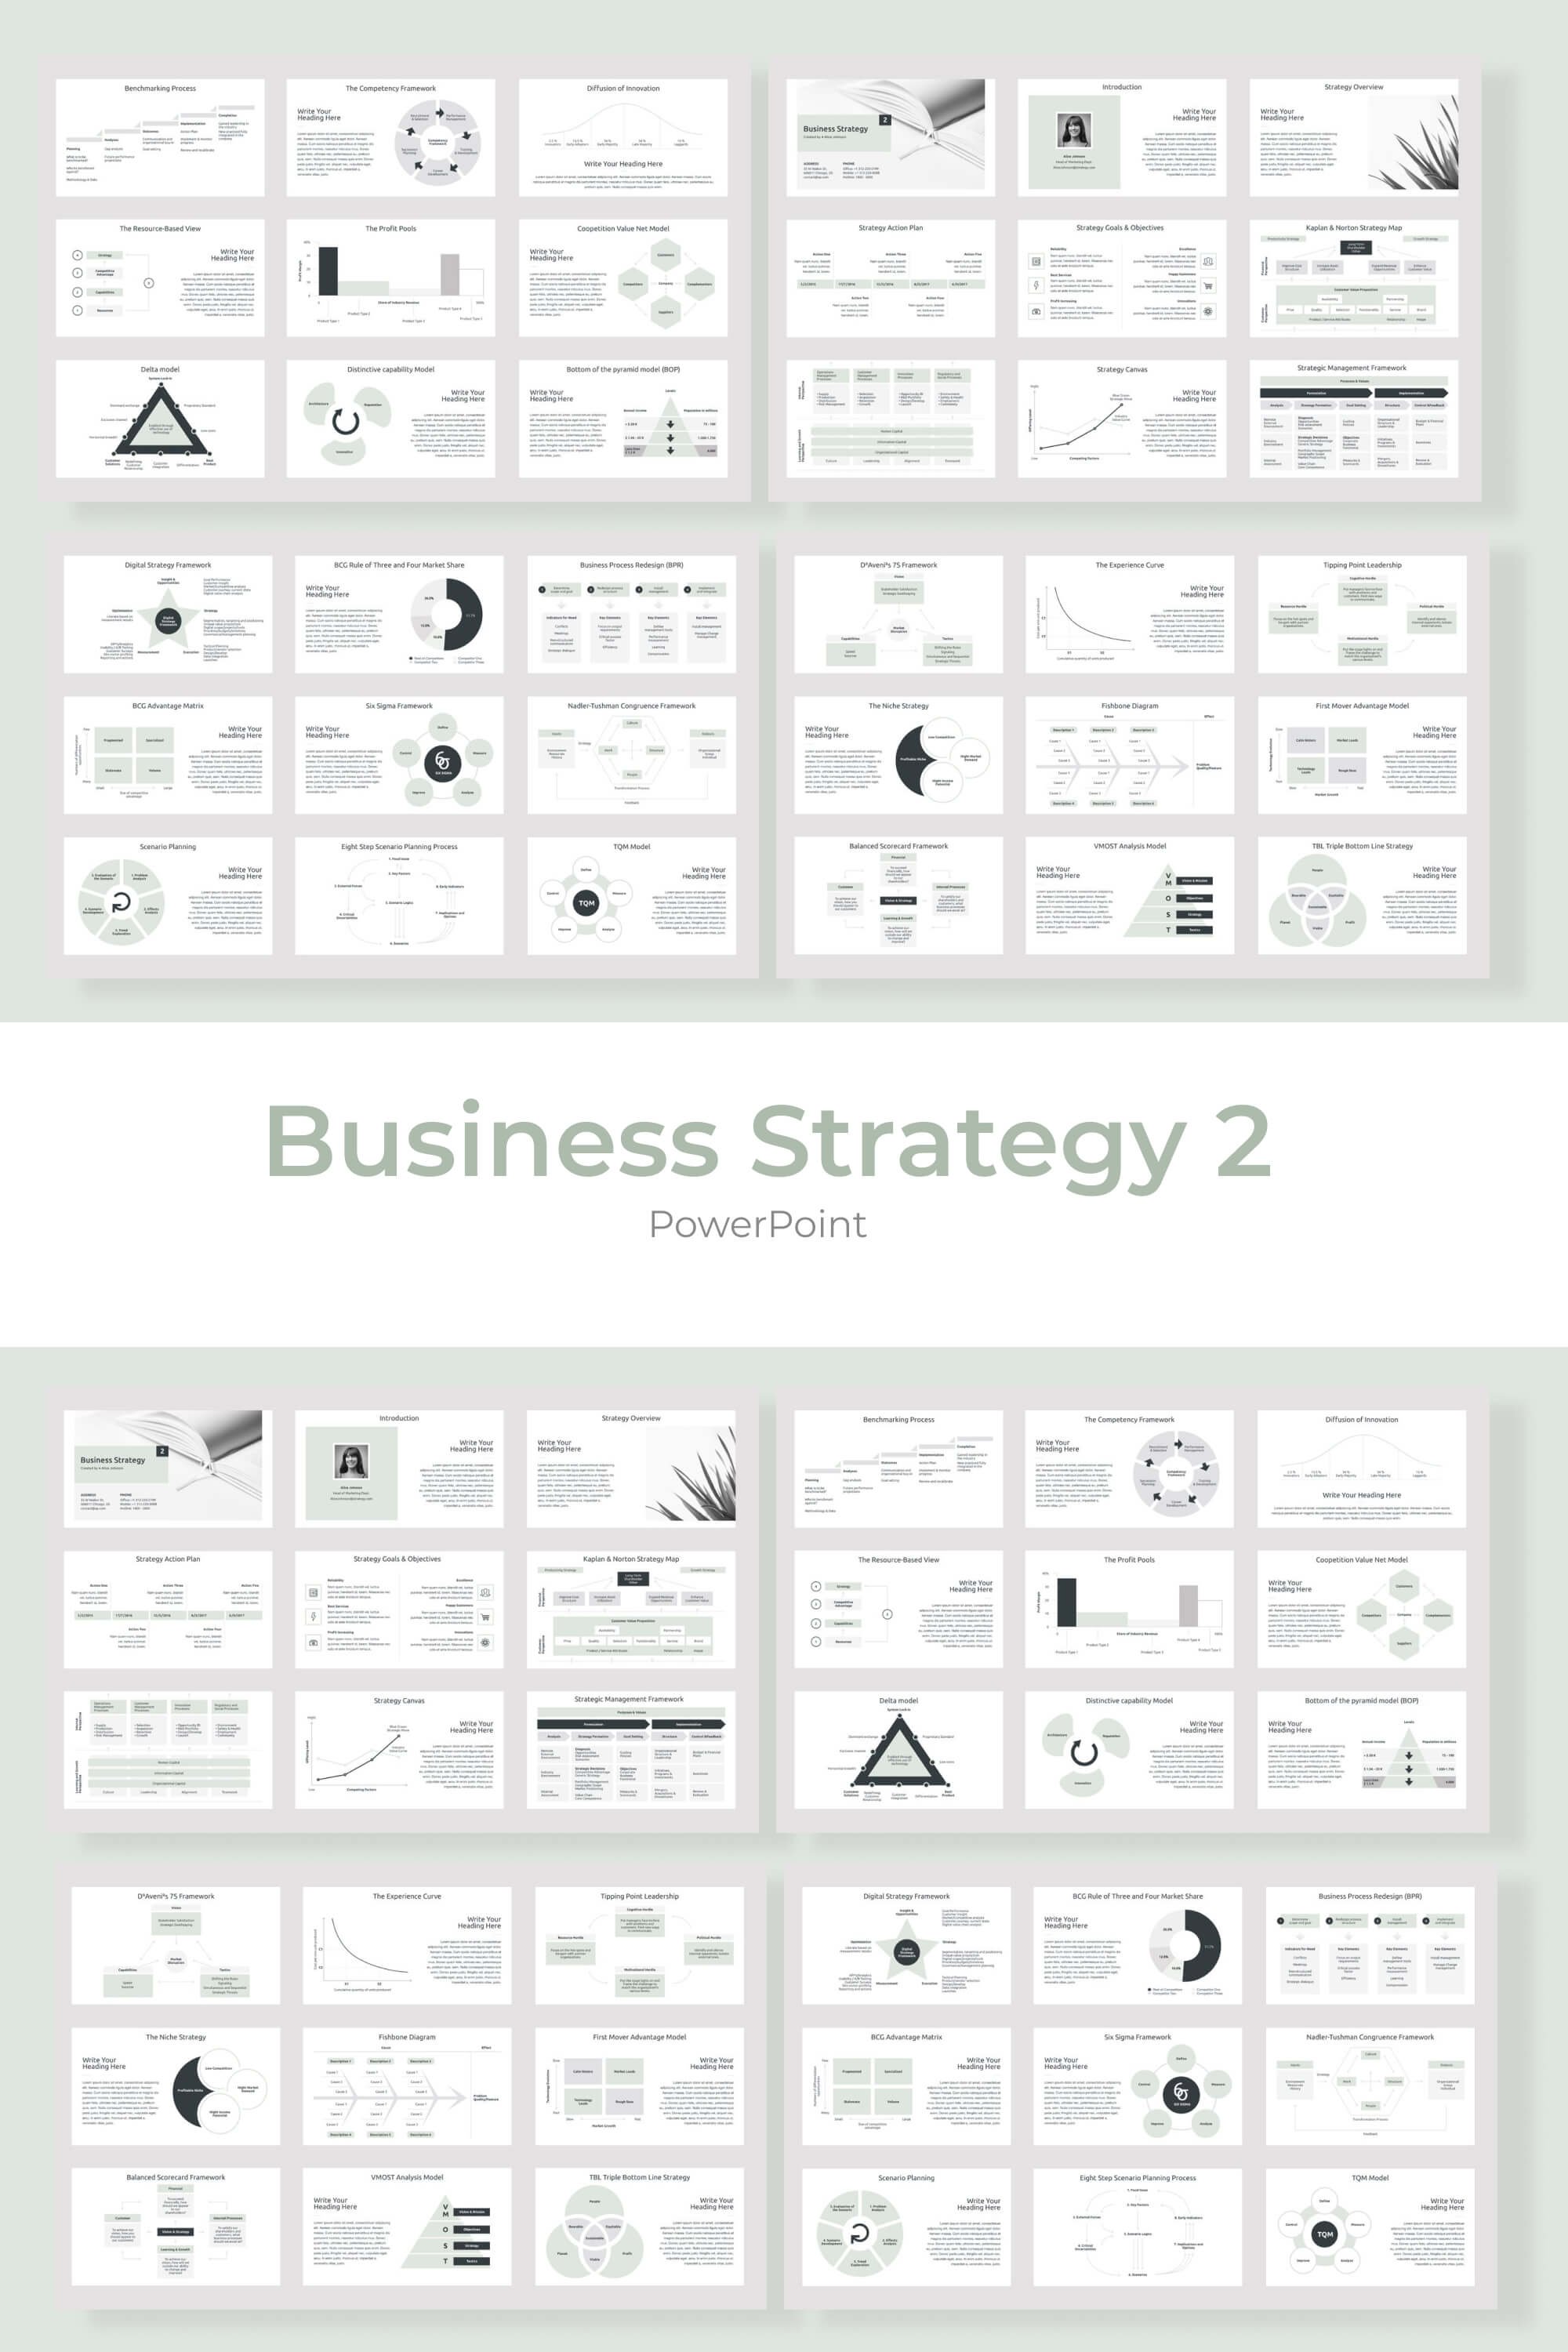 Business Strategy 2 Powerpoint.